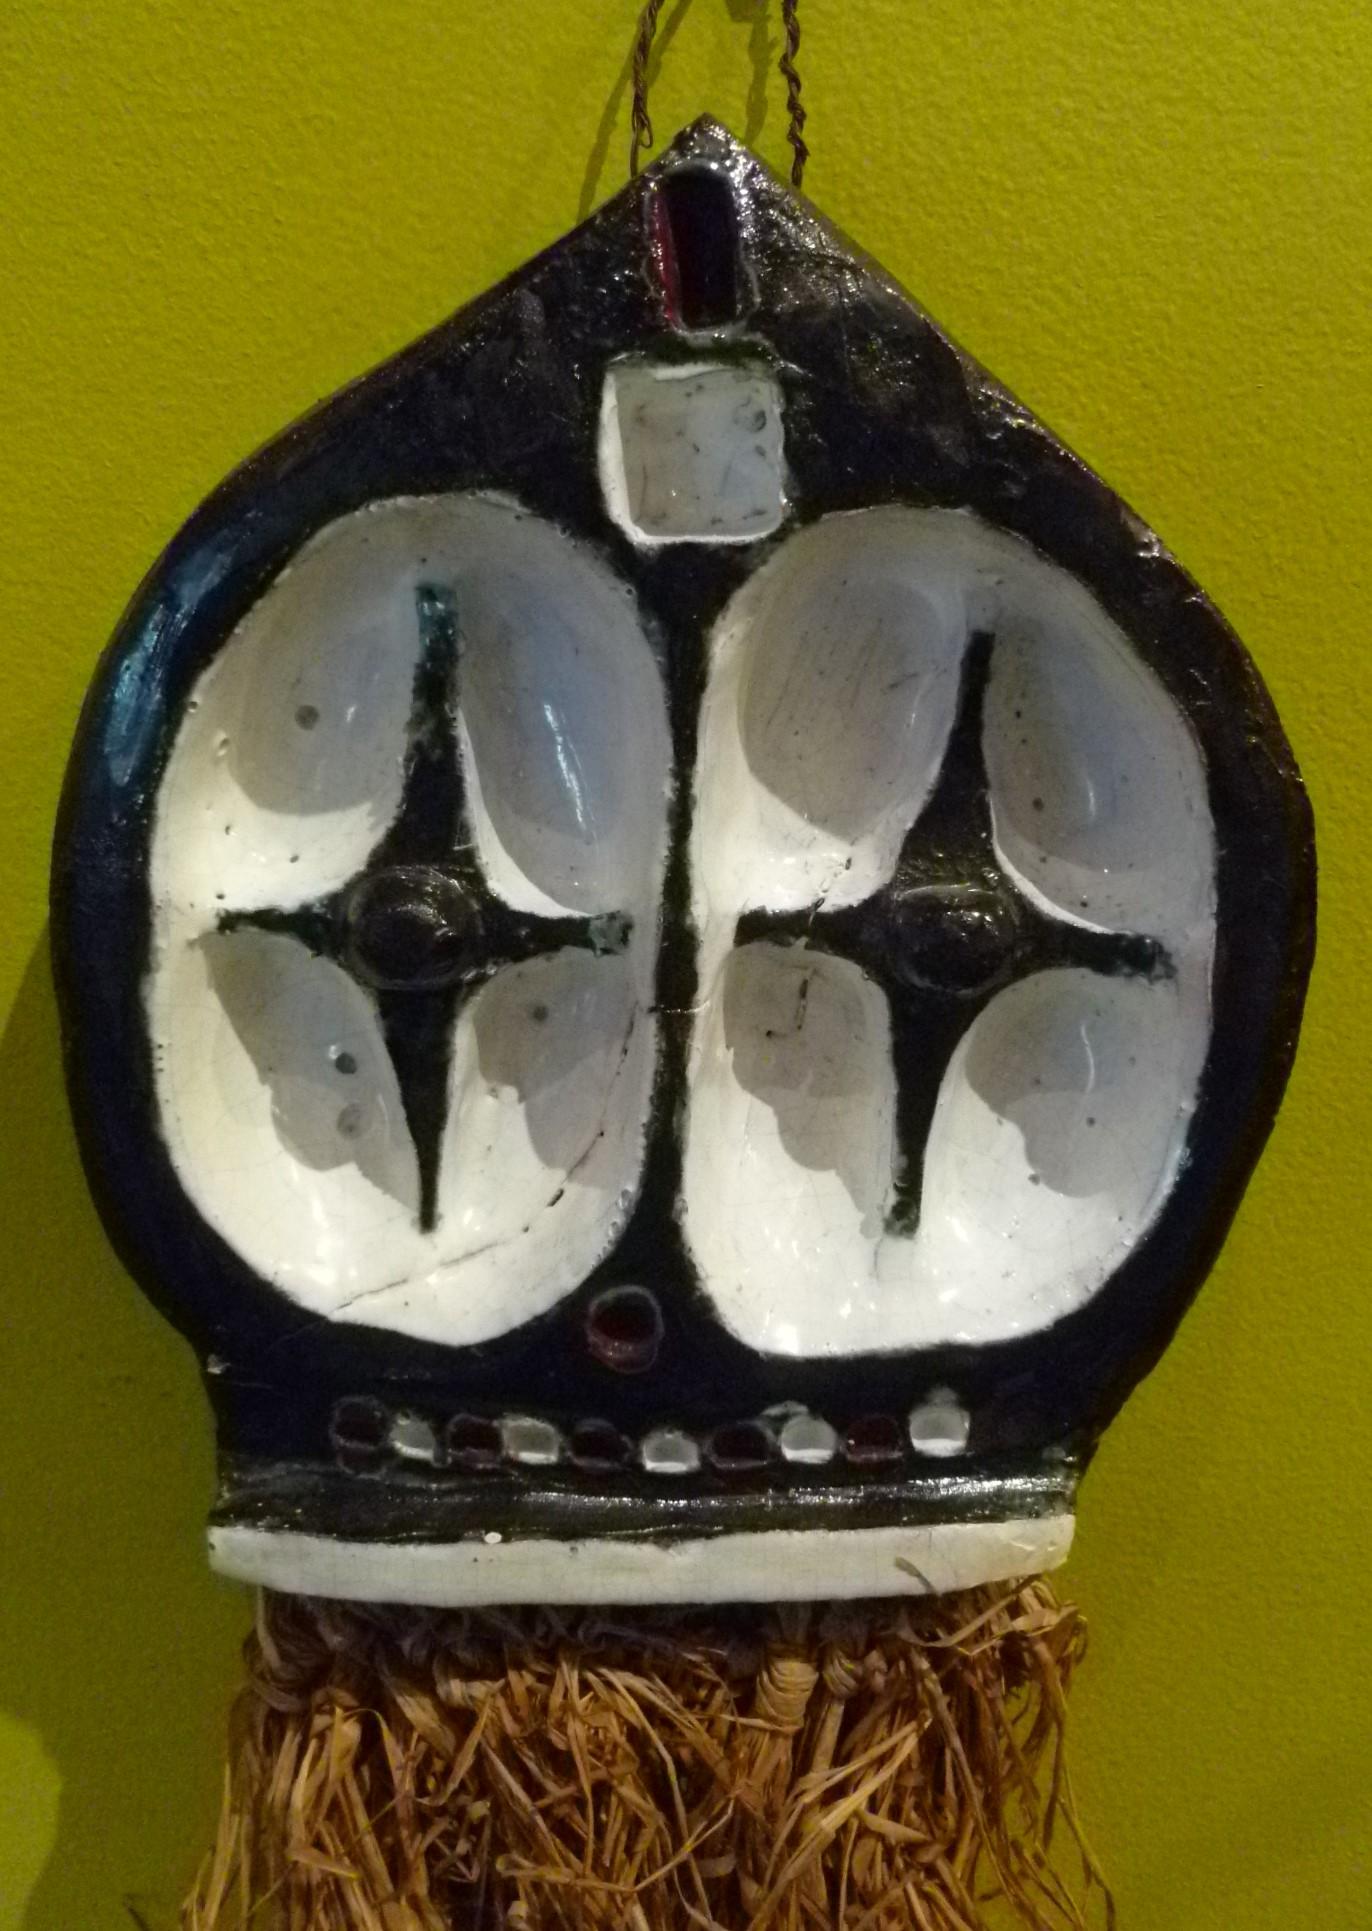 From the 1950s, a pottery wall hanging of a stylized African mask with Raffia/Straw beard, purchased in a Brussels antique shop in the 1970s. Wonderful depiction of what has been used in Africa for centuries as a way to communicate with the deities